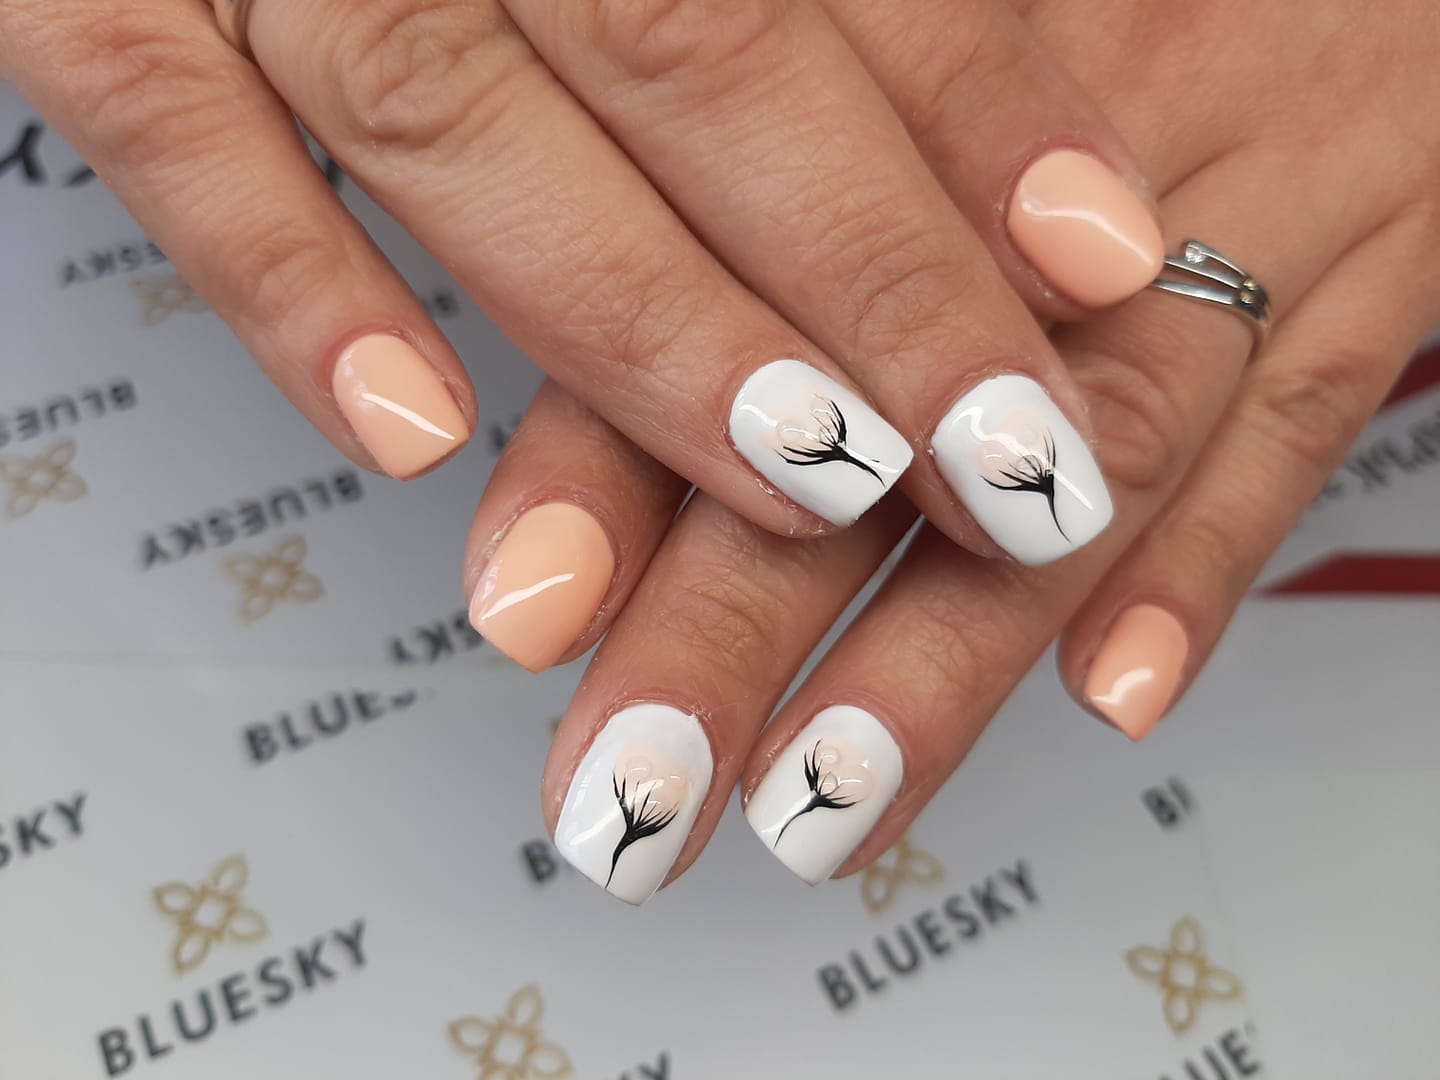 5. Nail Art Trends to Try Right Now - wide 5